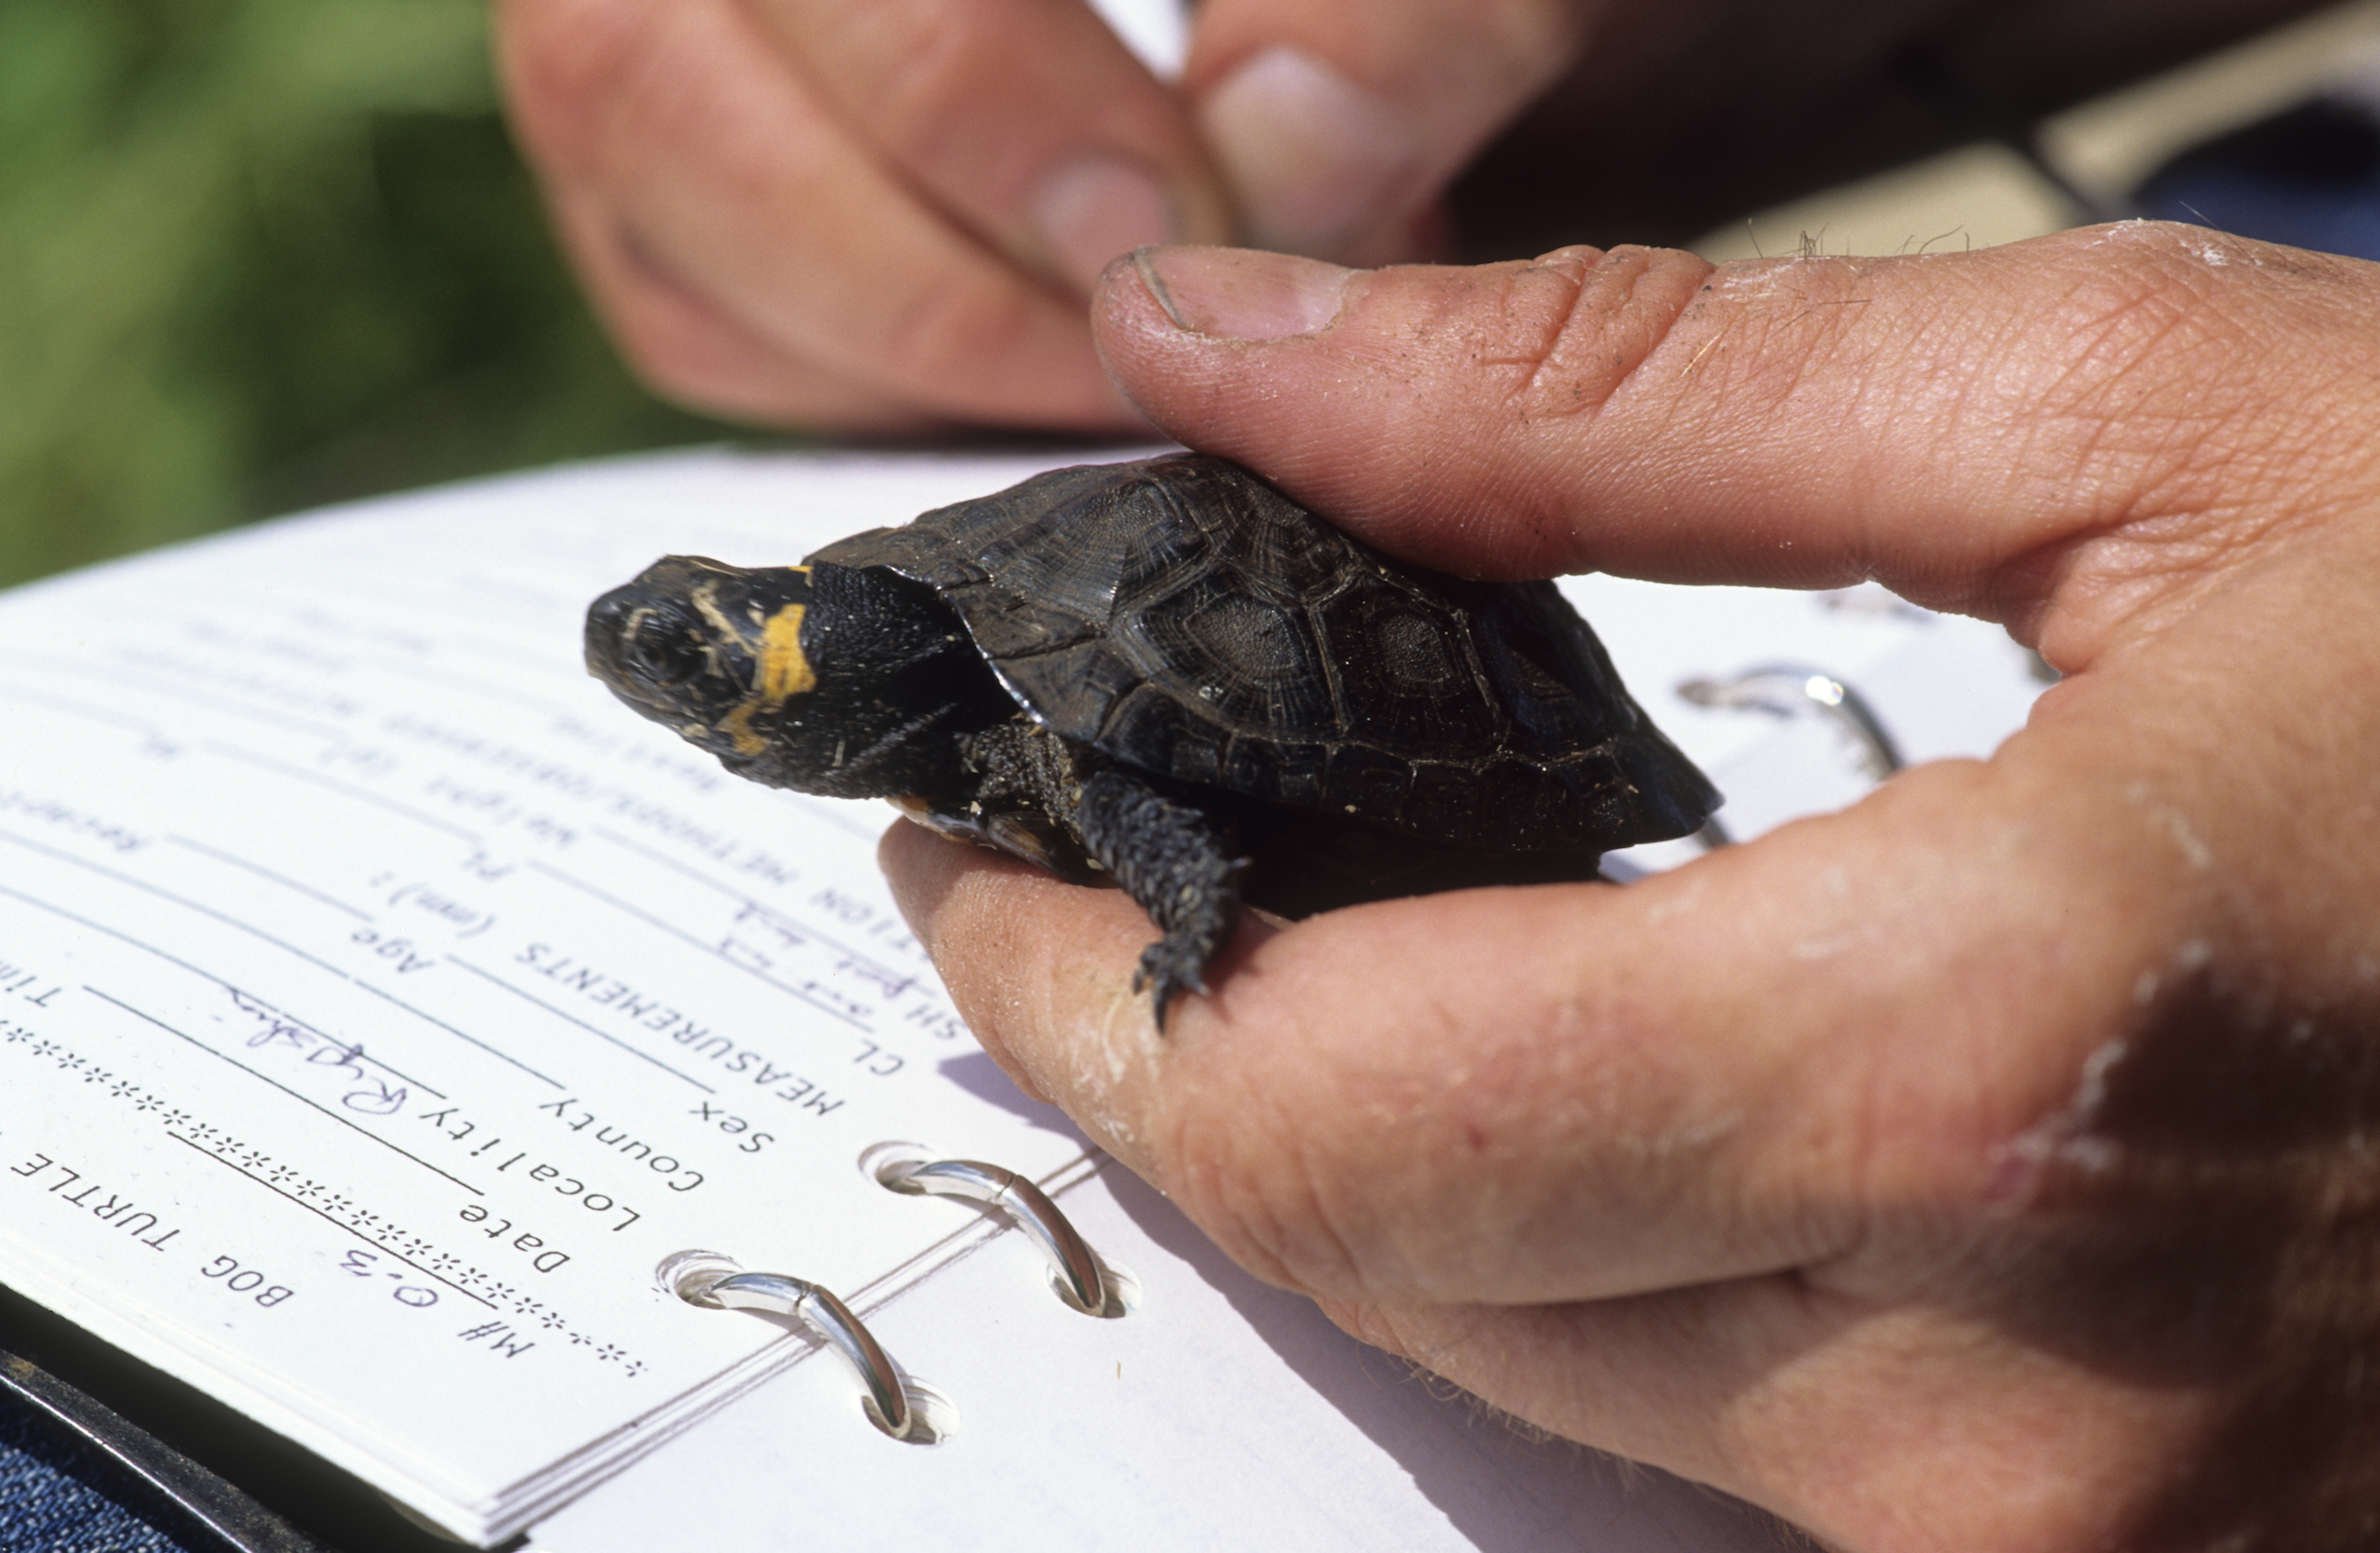 A hand holds a small turtle while the other hand writes in a notebook.